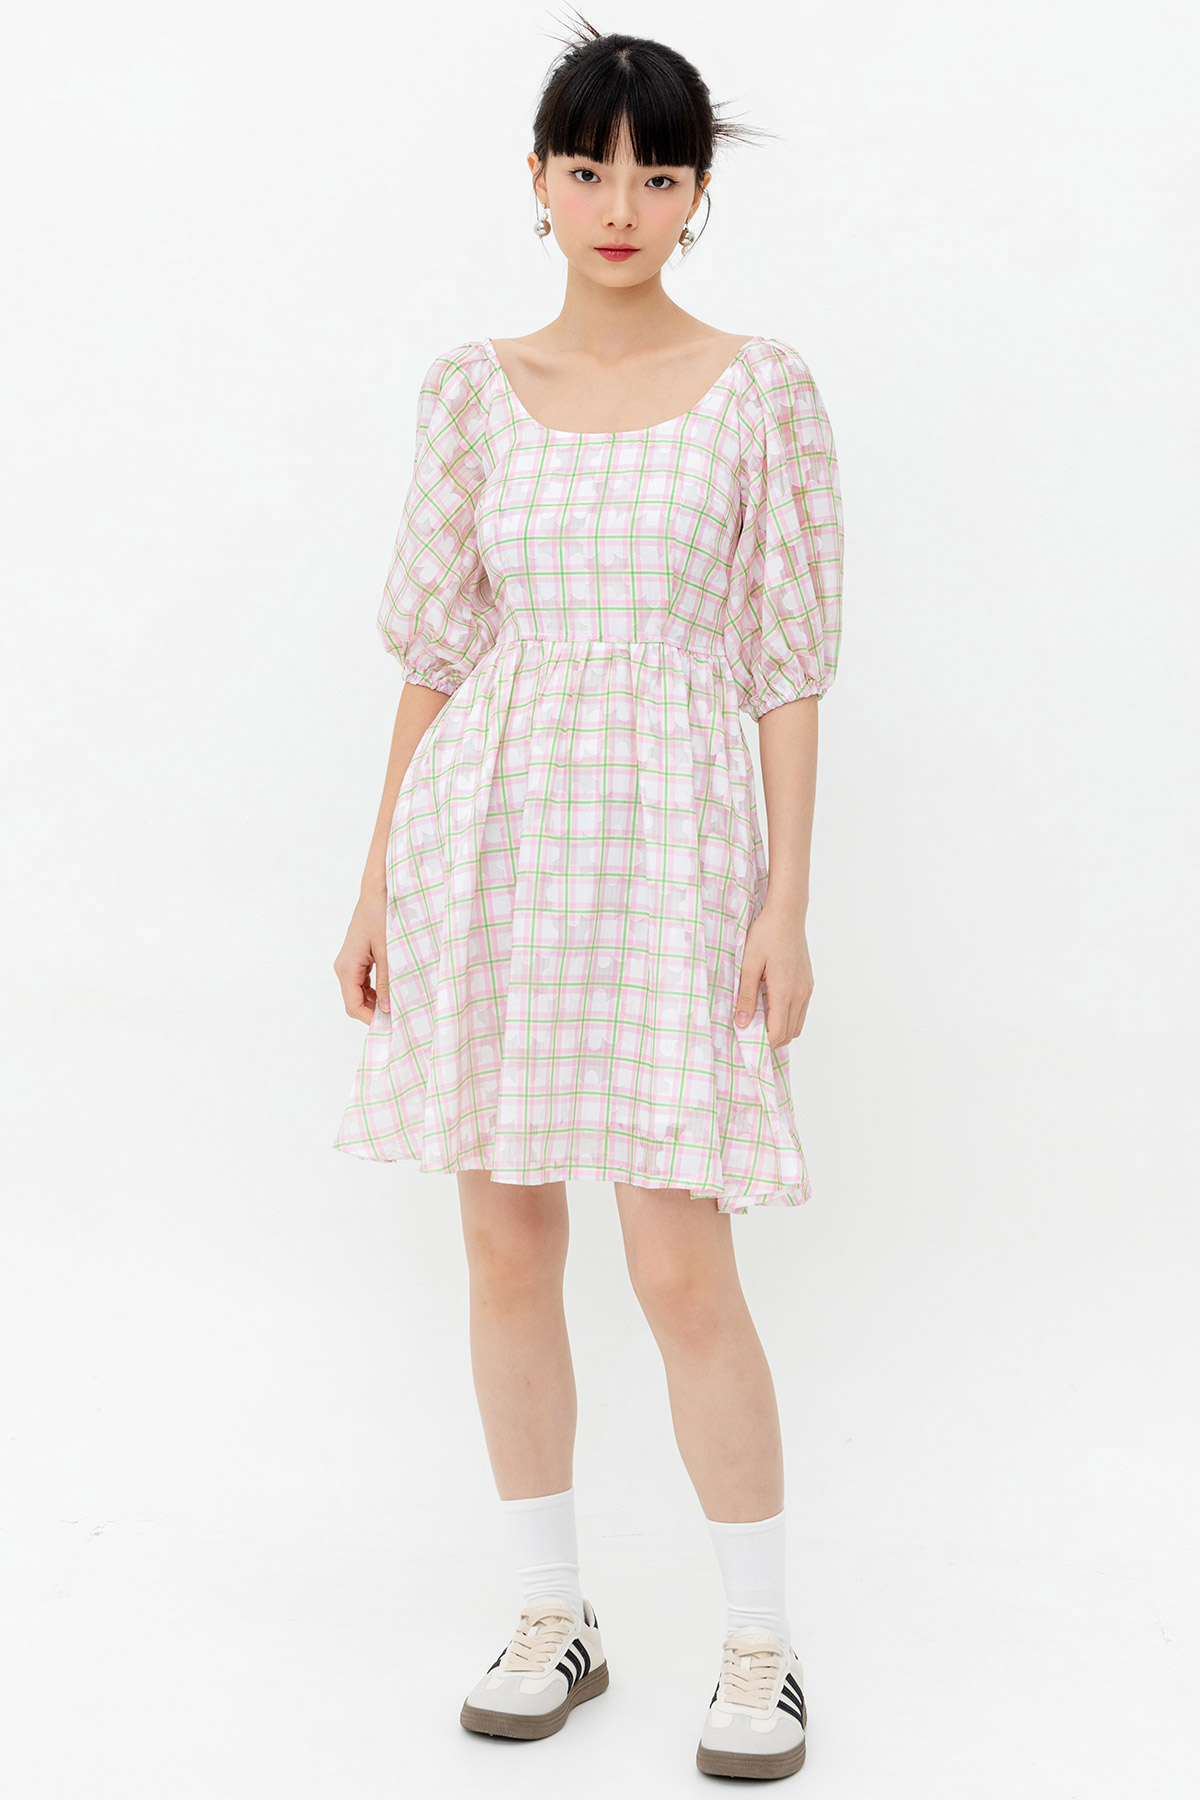 *SALE* JULIA DRESS - DAY DREAMERS [BY MODPARADE]